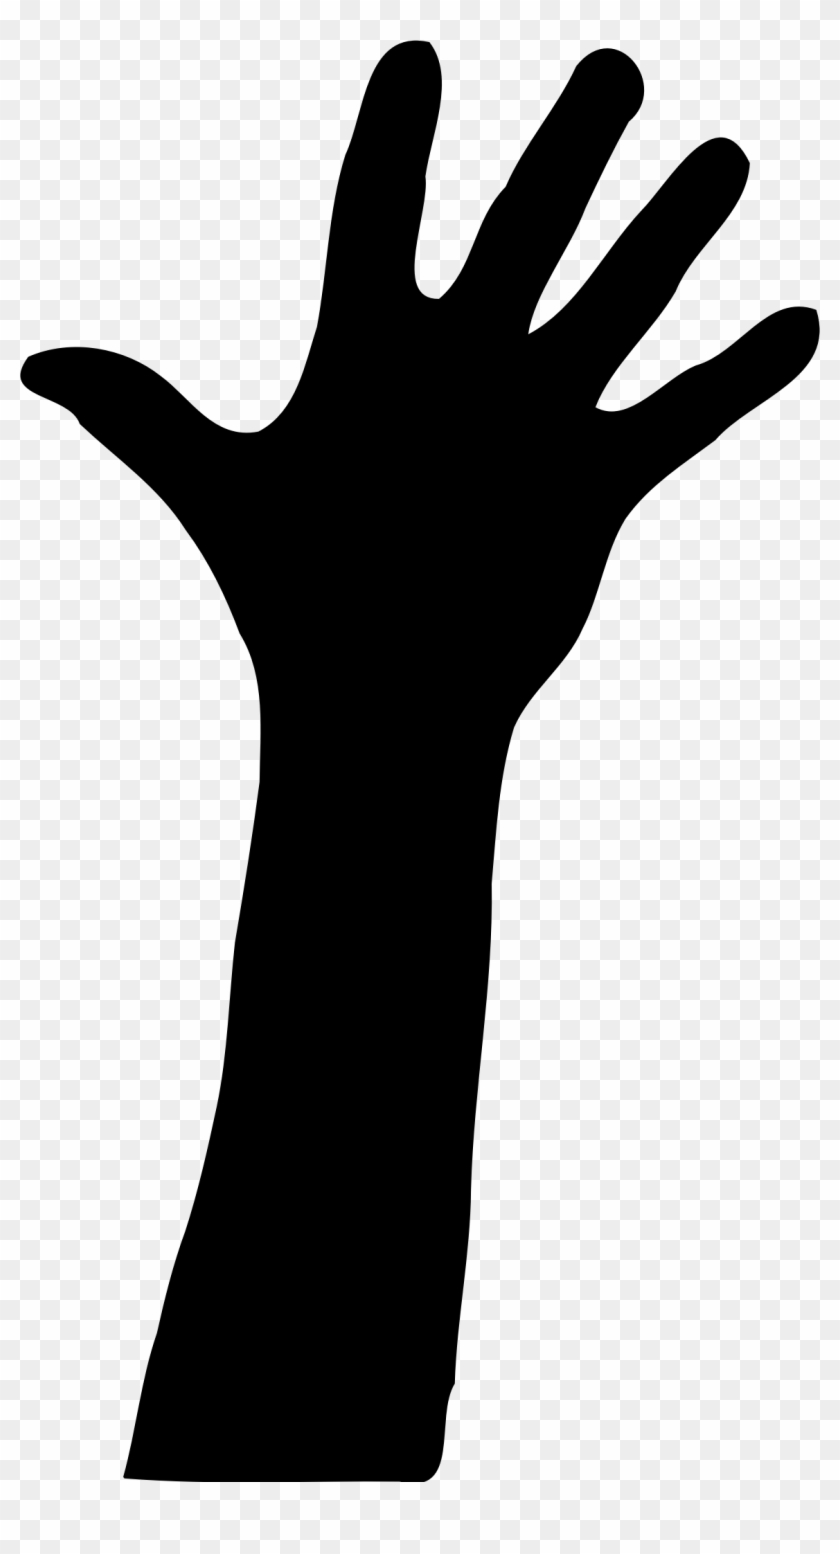 Silhouette Clipart Hand - Raised Hand Silhouette #185421